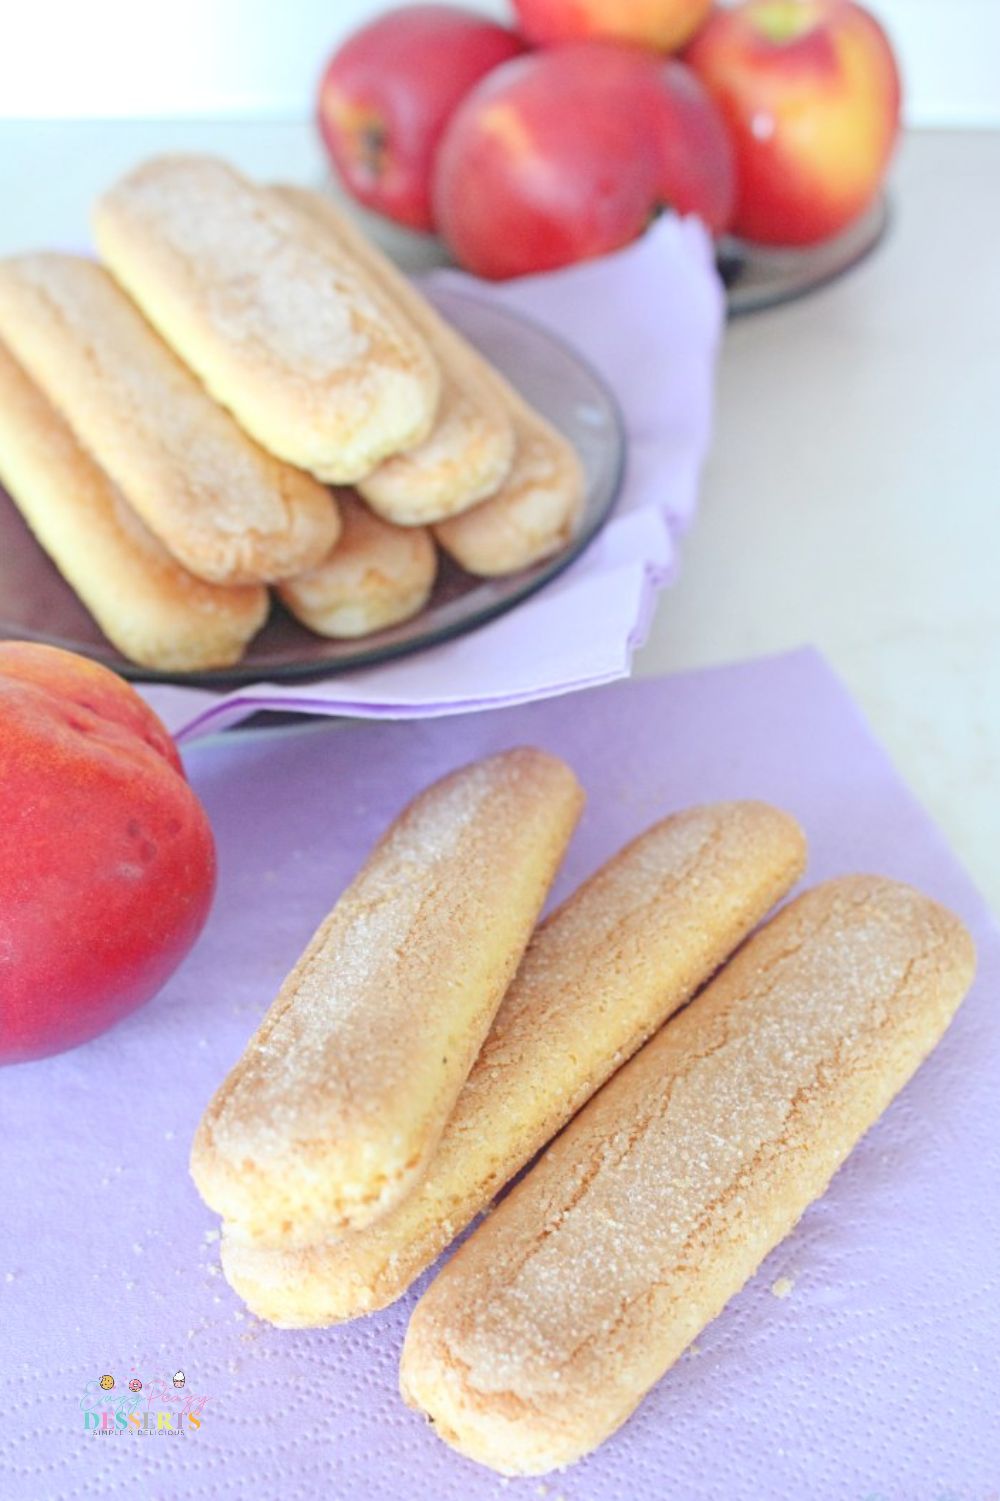 Close up image of ladyfinger cookies prepared with a homemade recipe